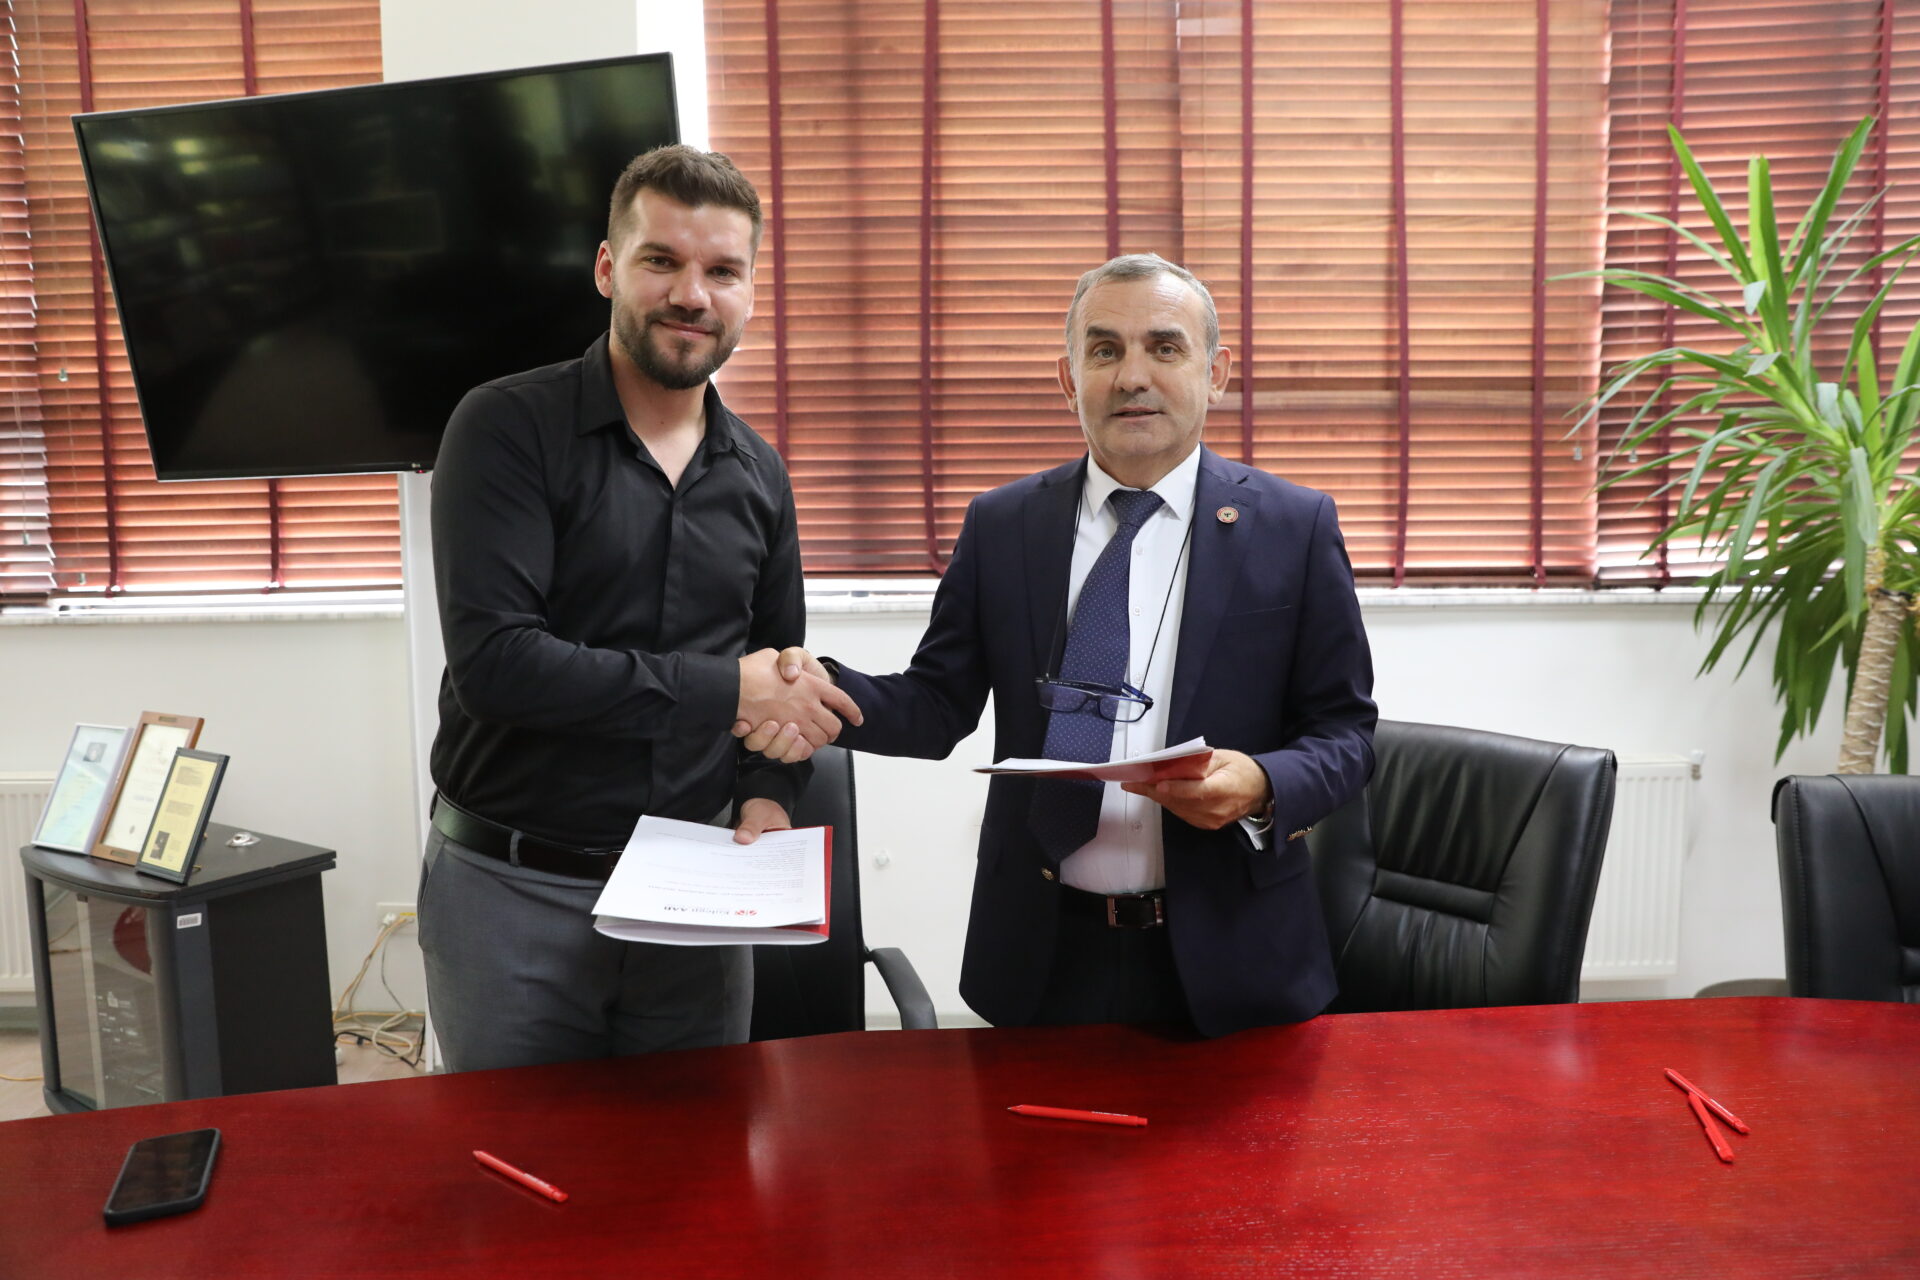 The rector of the AAB College signed a cooperation agreement with the chairman of the National Council of Albanians in the Presheva Valley